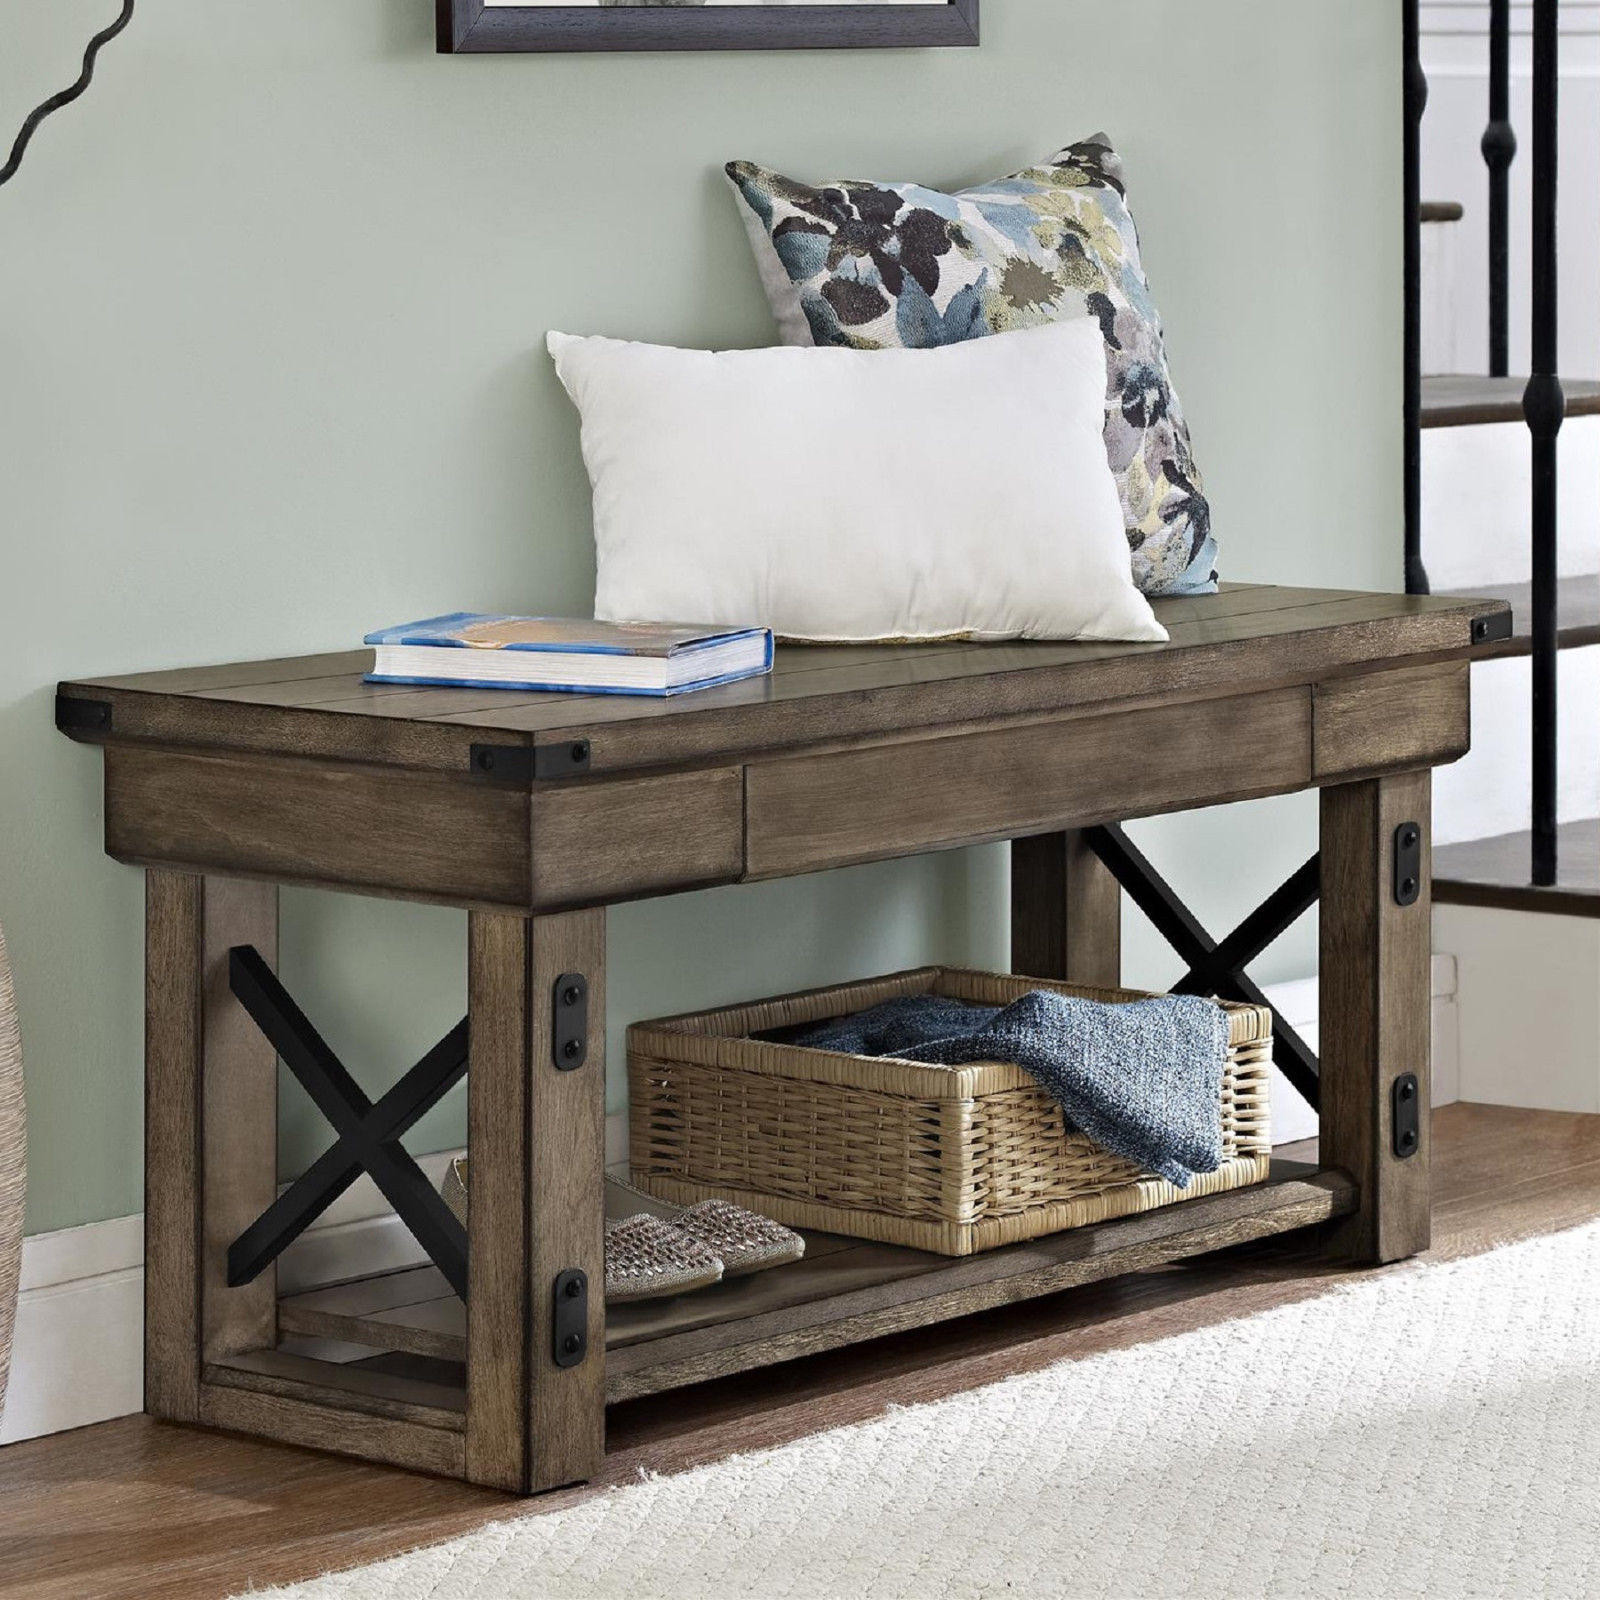 Entry Way Storage Bench
 Entryway Storage Bench Rustic Hallway from cindictc on eBay